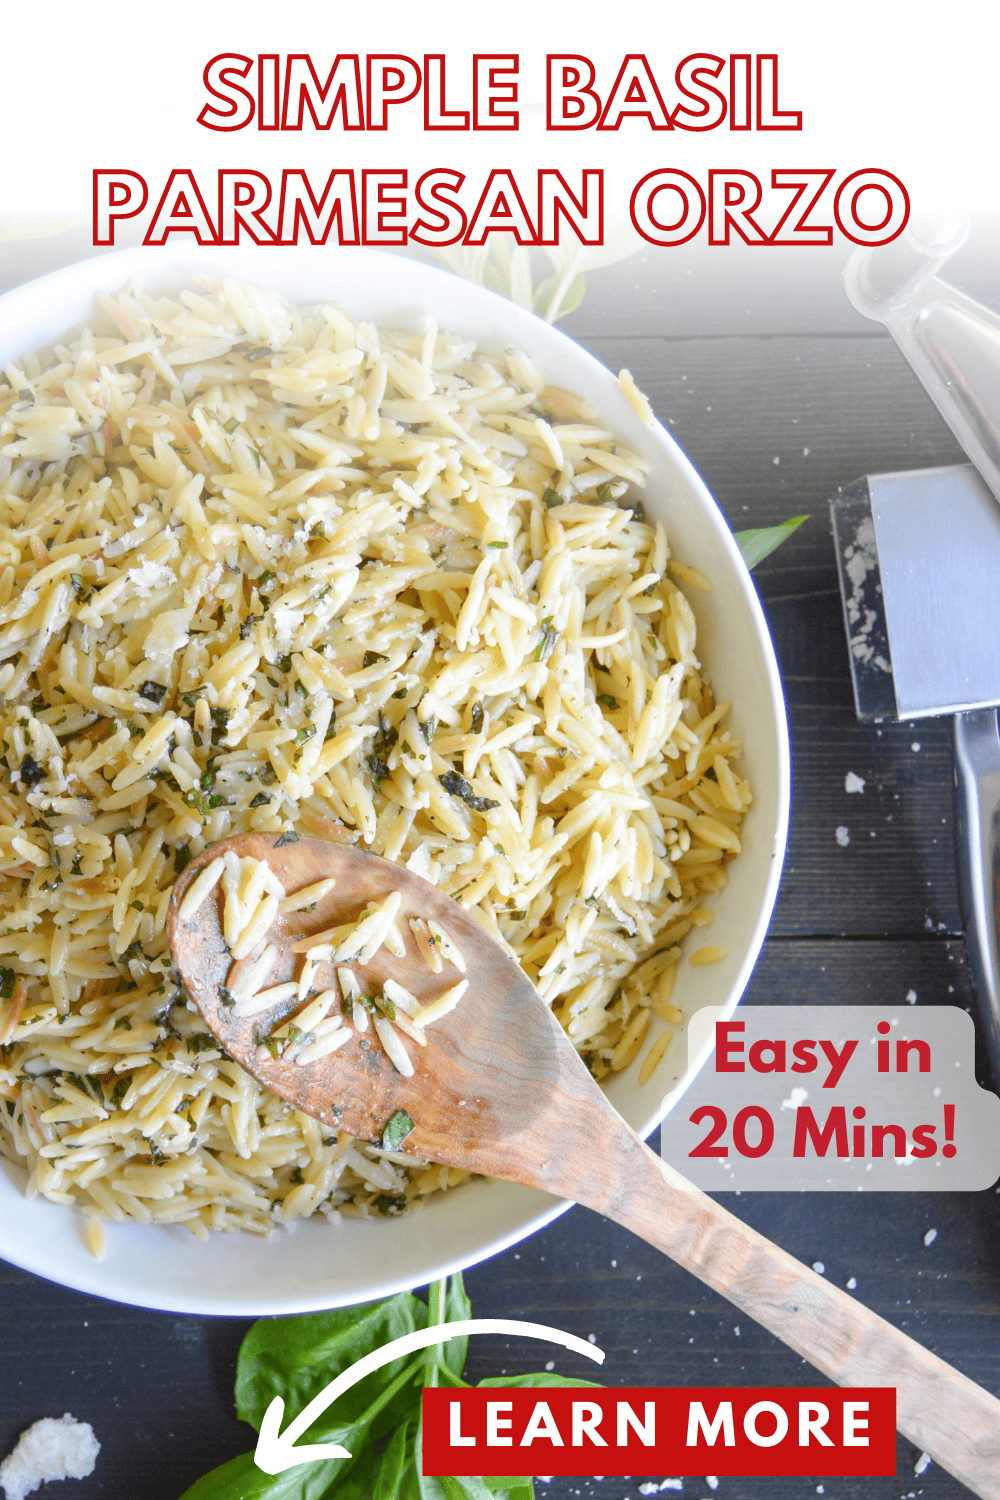 Simple Basil Parmesan Orzo easy in 20 min Pinterest Pin with orzo in white serving bowl with wooden spoon and a cheese grater with parmesan on the side with some basil leaves